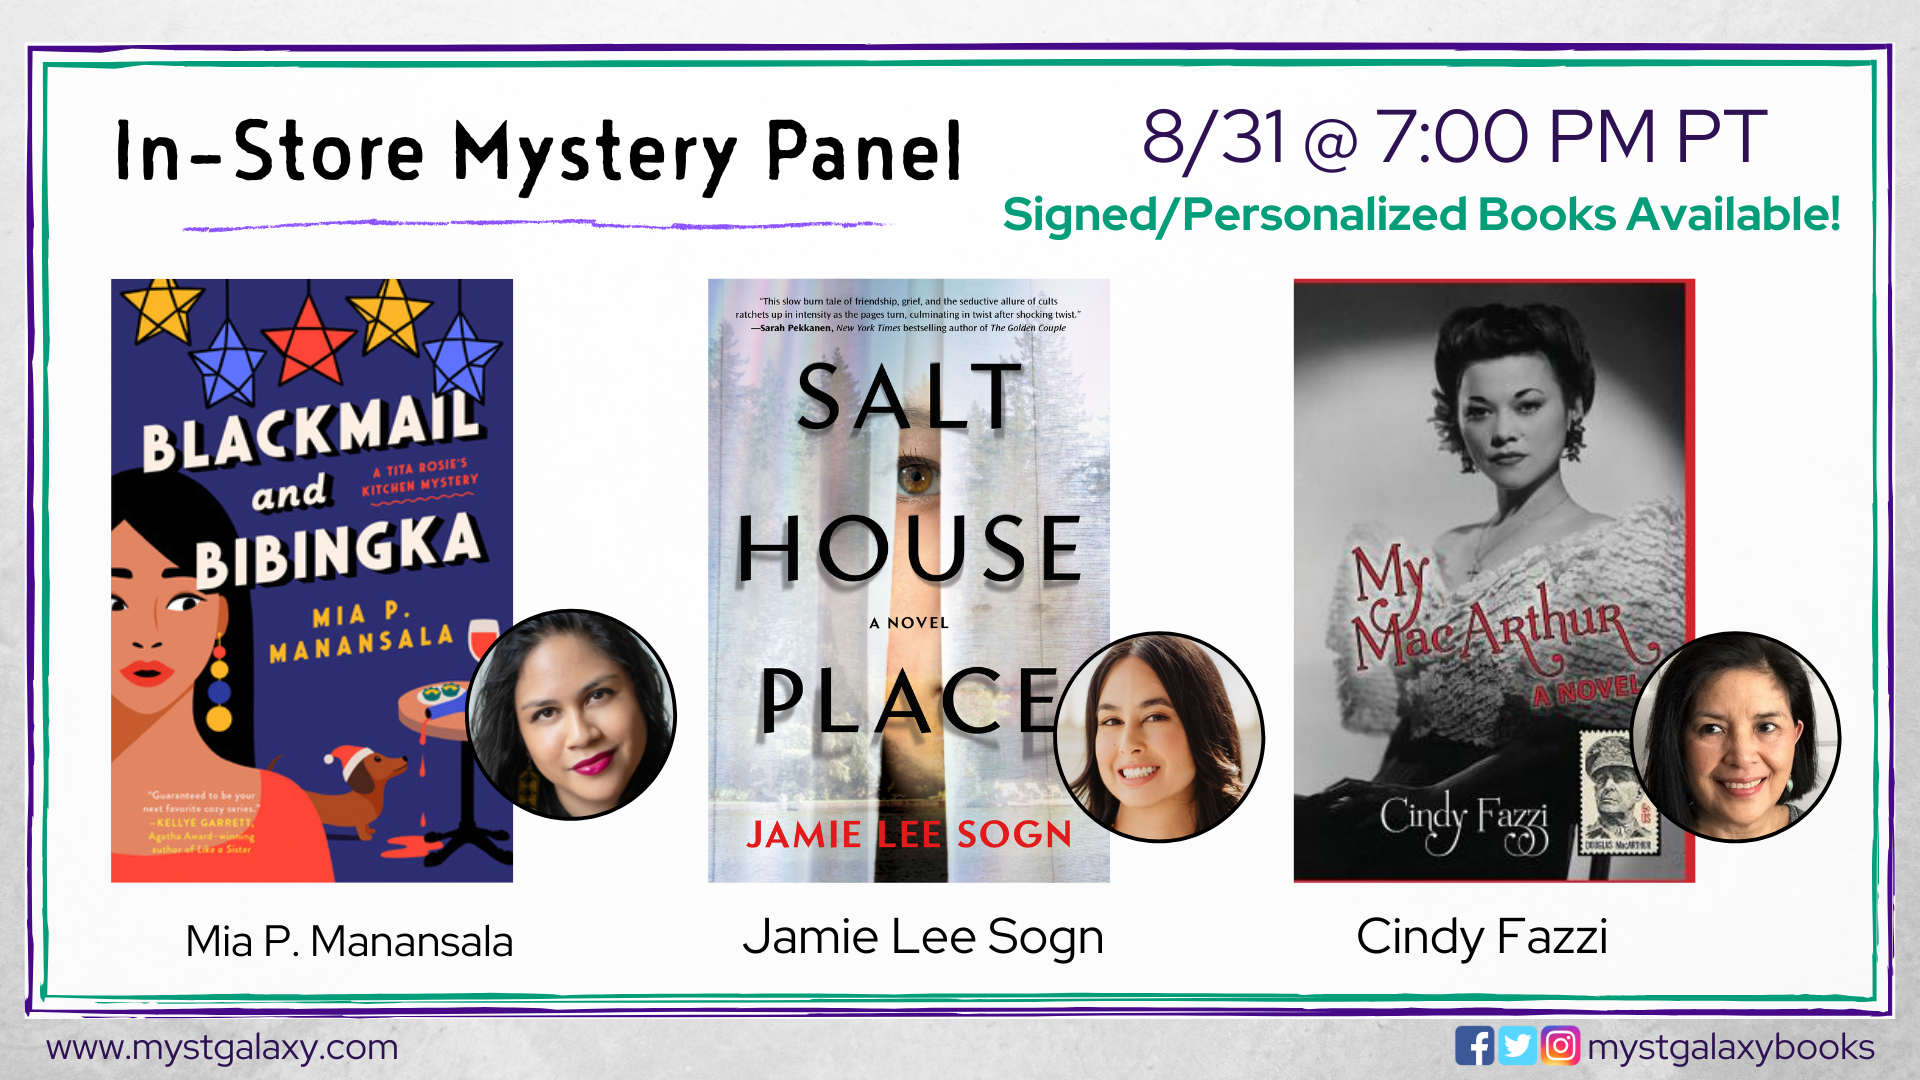 Flyer for an in-store event with authors Mia P. Manansala, Jamie Lee Sogn and Cindy Fazzi, Thursday, August 31, 7:00pm, at Mysterious Galaxy Bookstore in San Diego.